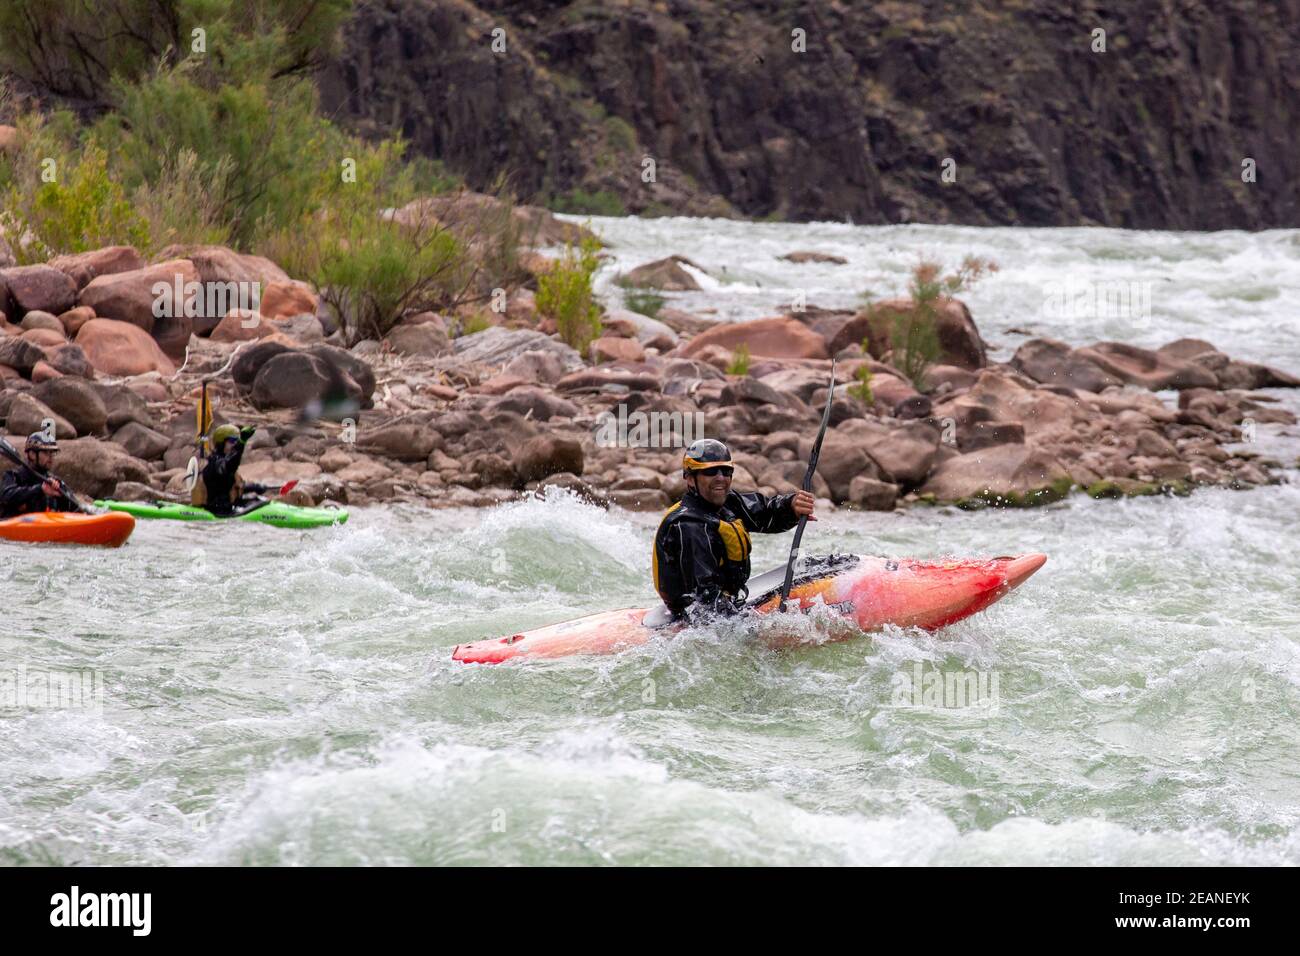 Shooting rapids in a kayak on the Colorado River, Grand Canyon National Park, UNESCO World Heritage Site, Arizona, United States of America Stock Photo